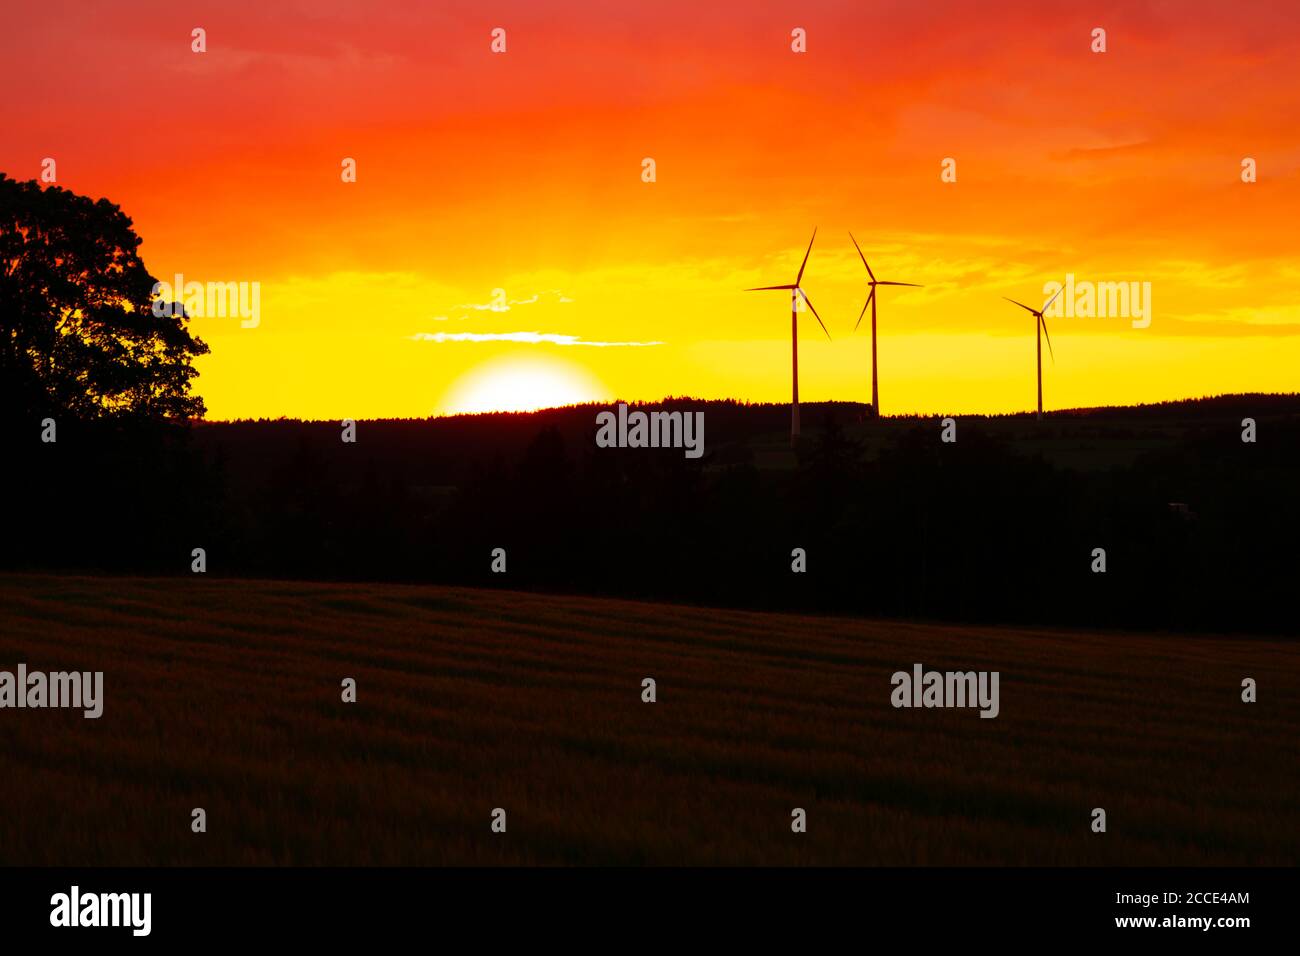 Orange Sky Sunset with wind turbines silhouettes in the background Stock Photo